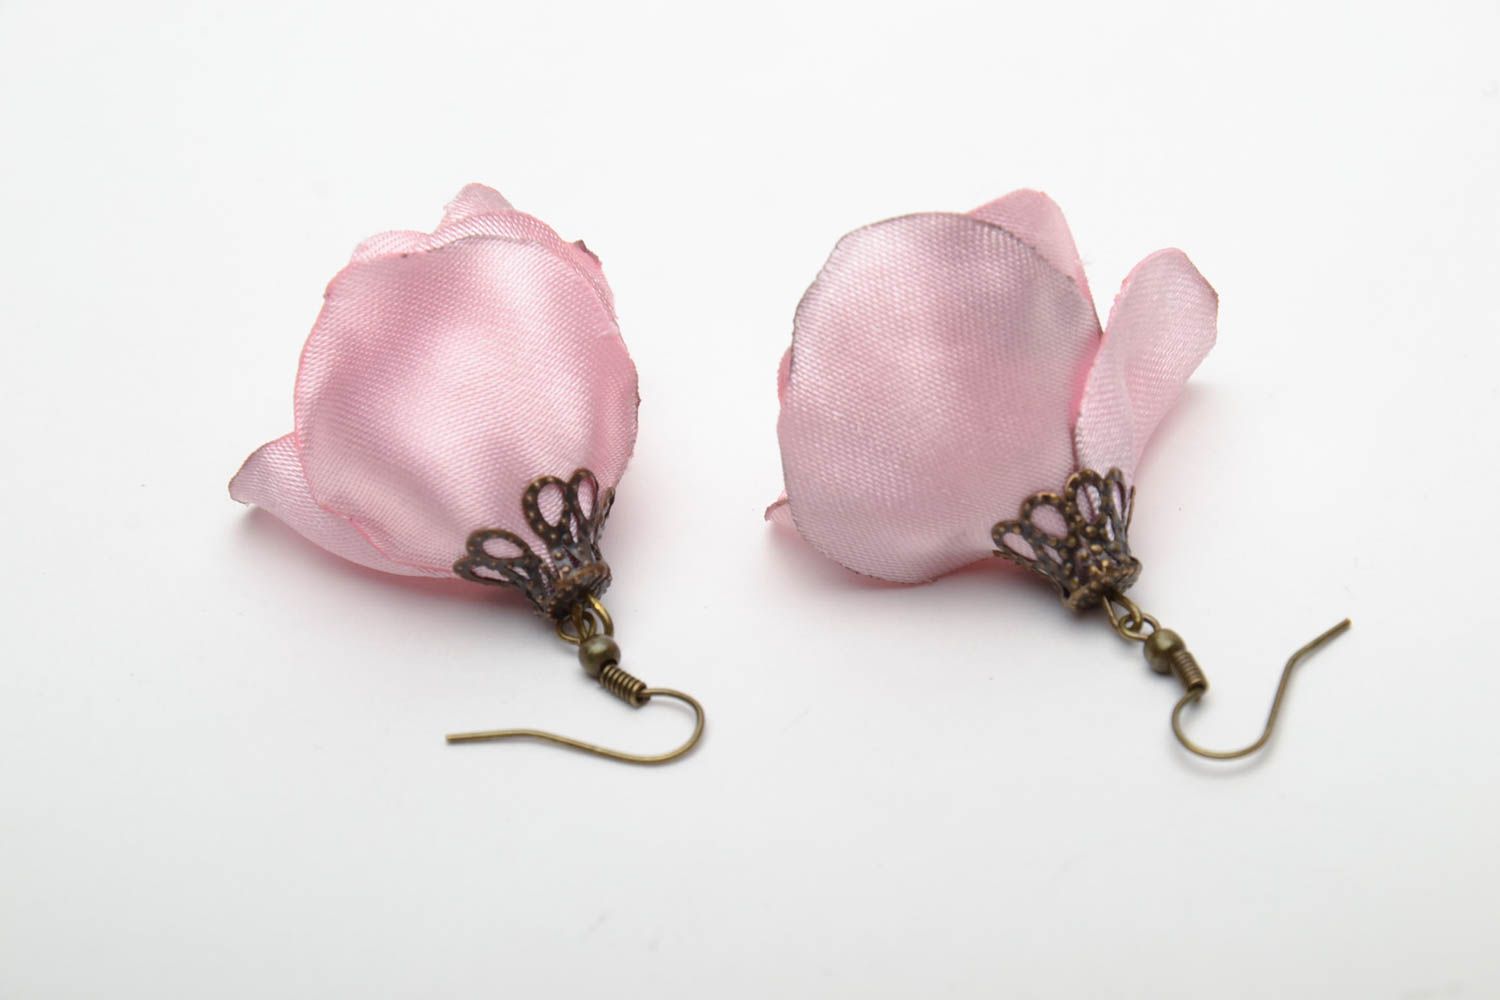 Floral earrings made of satin ribbons photo 5